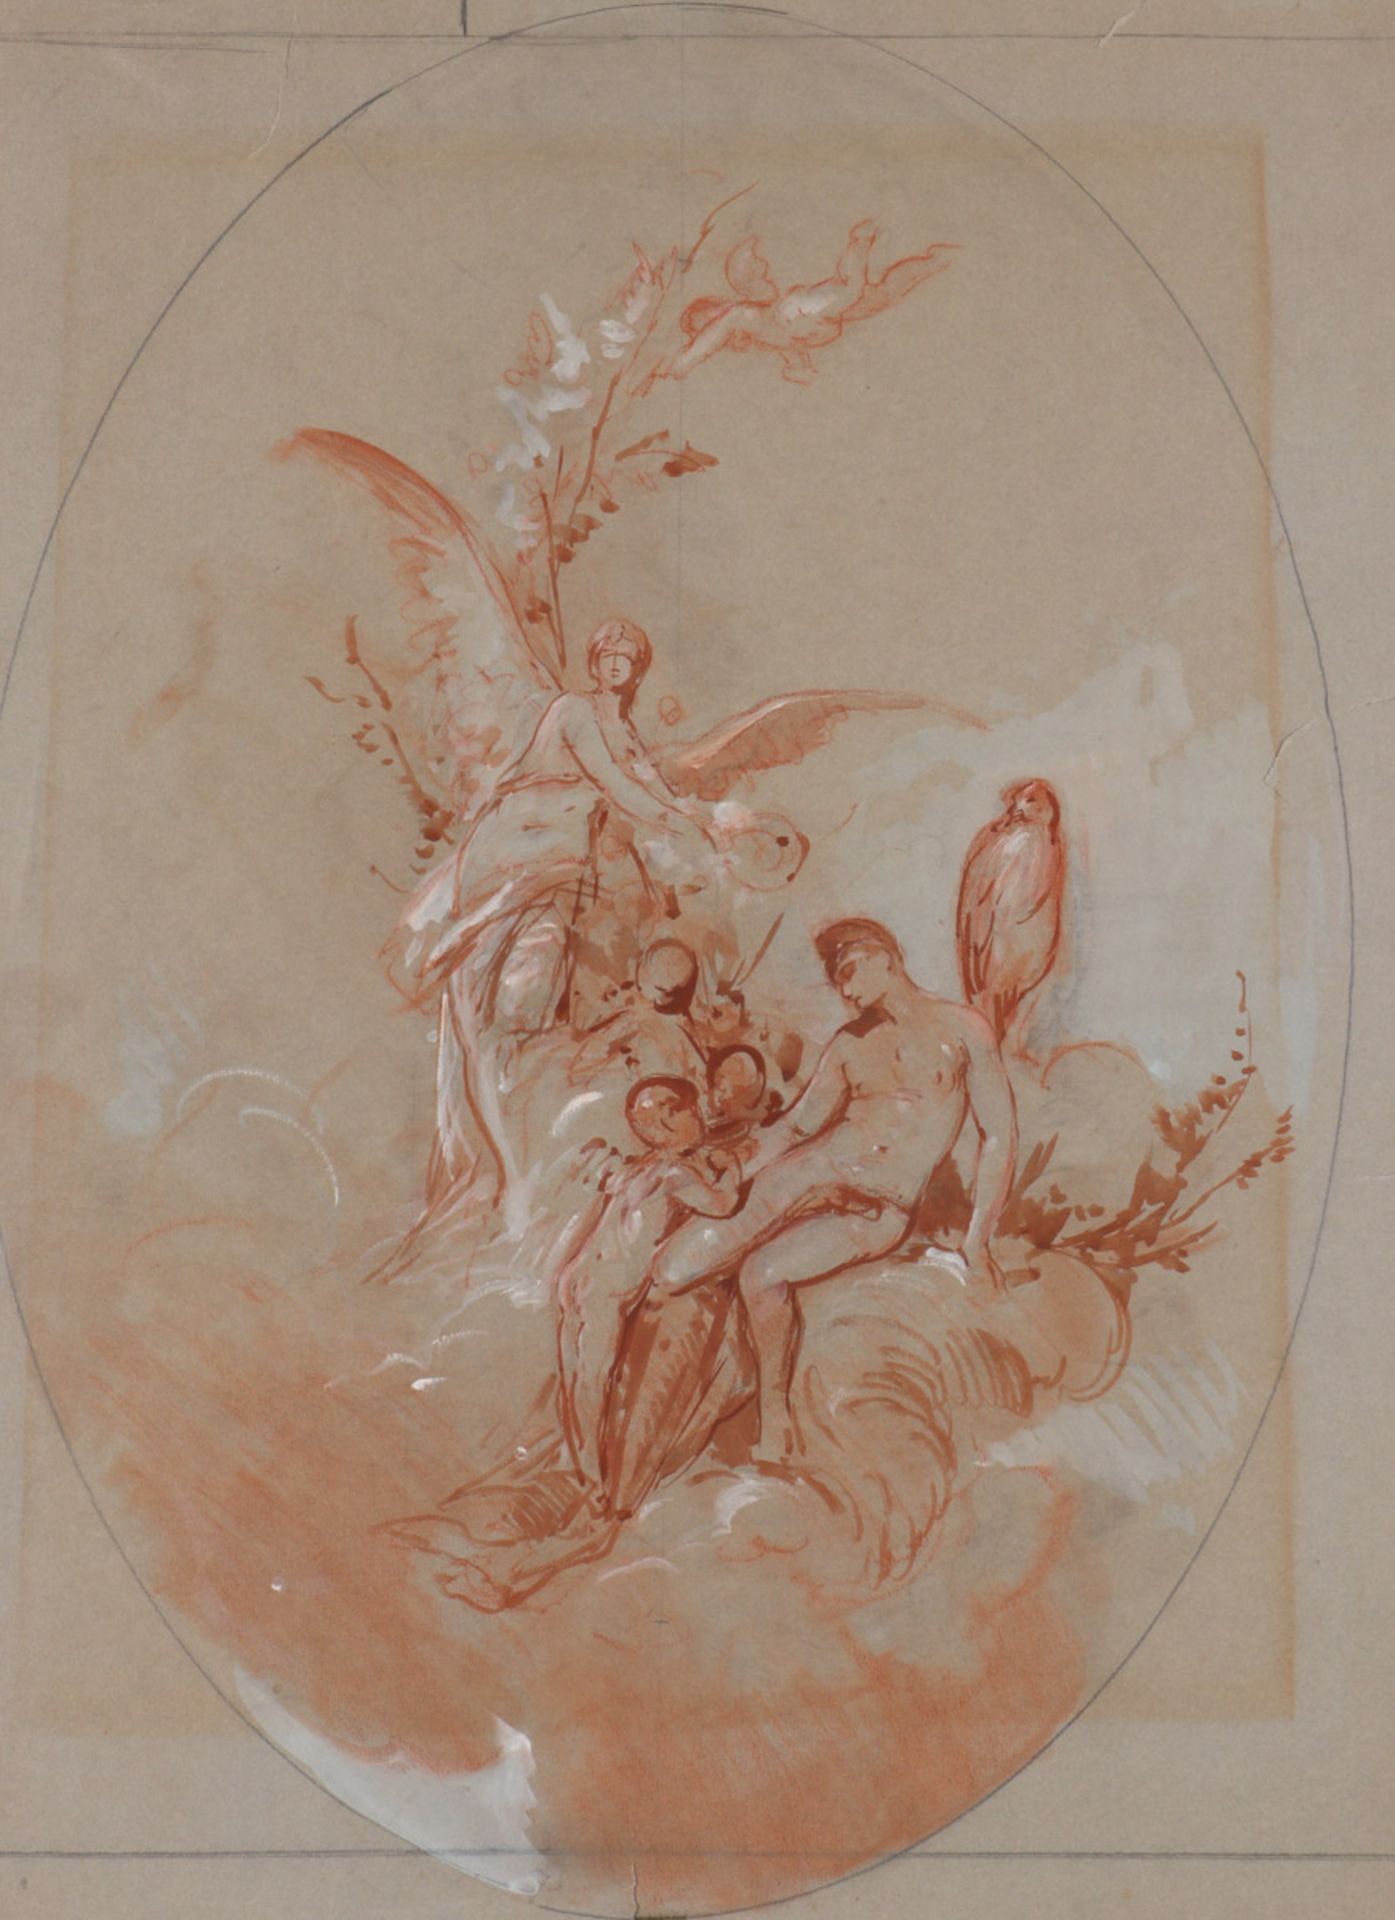 FRENCH SCHOOL (19TH CENTURY), ALLEGORY Probably a project for scenery or an interior decoration.